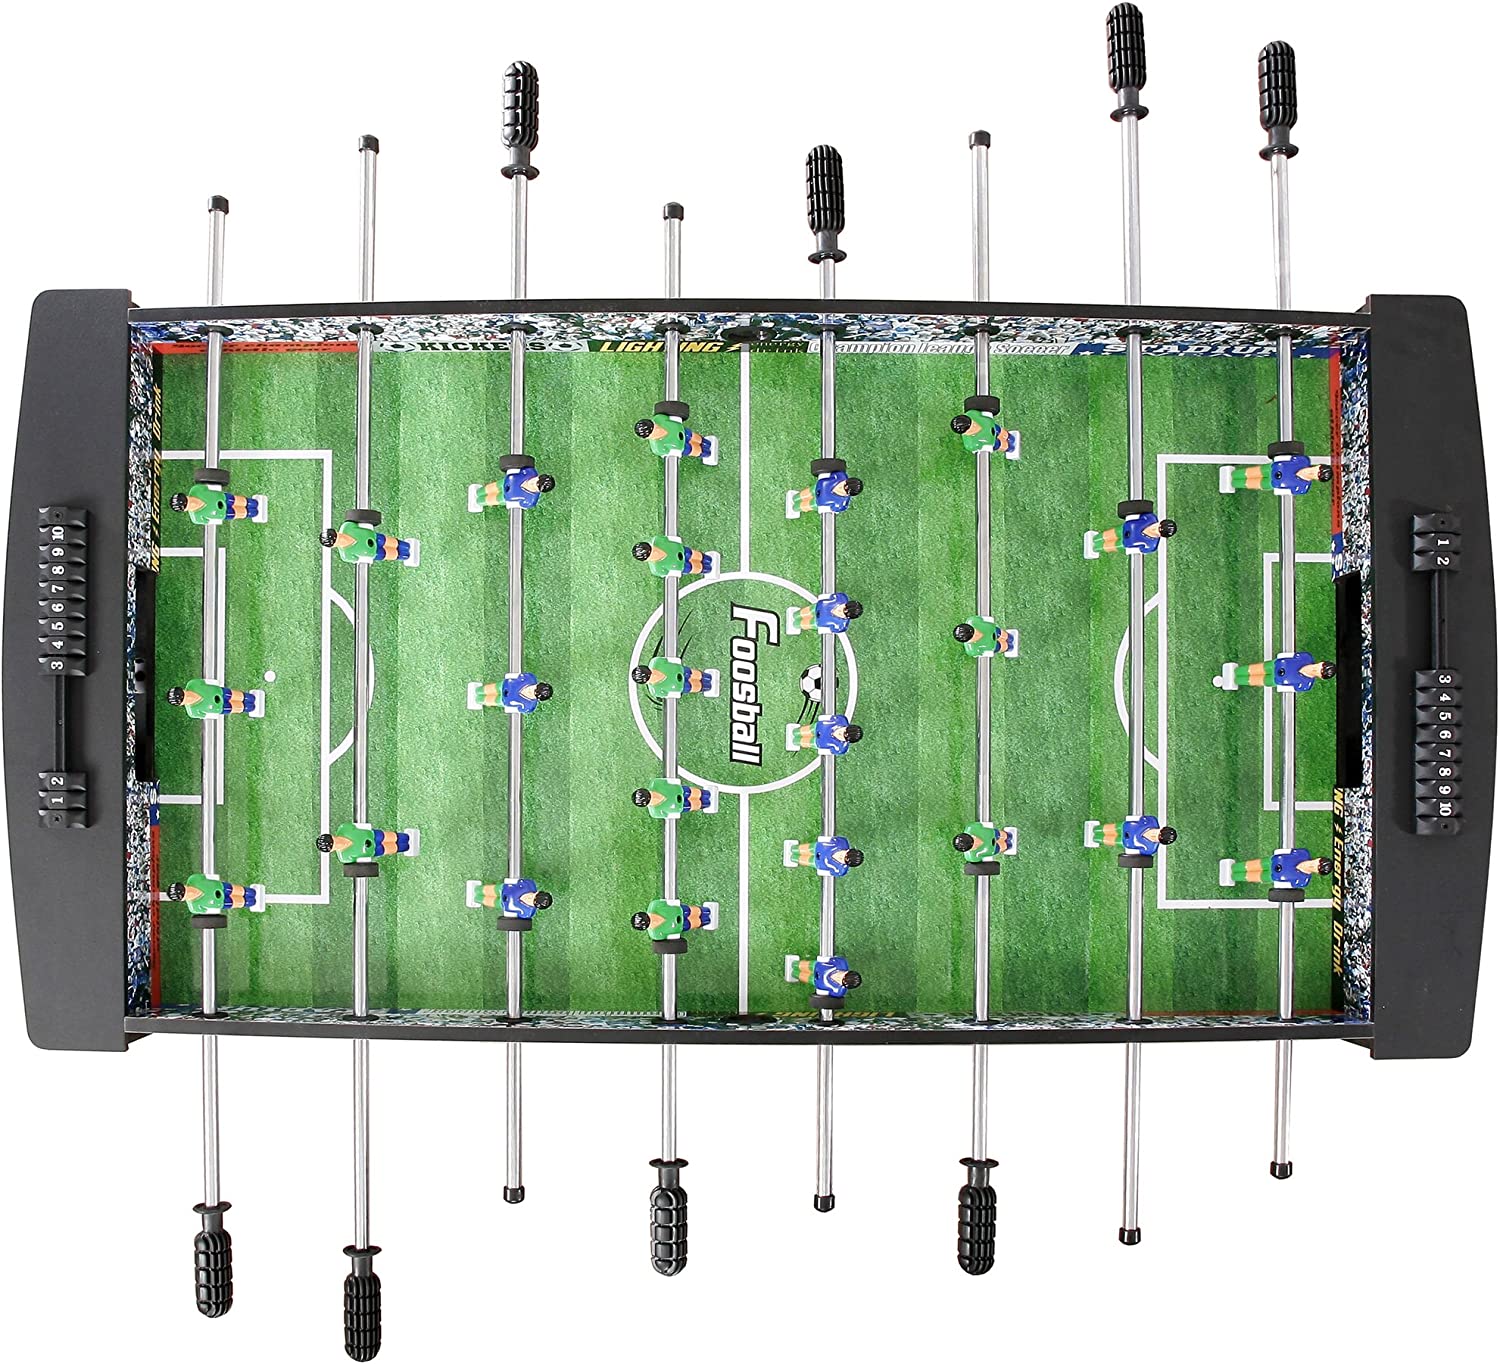 Hathaway Playoff 4’ Foosball Table, Soccer Game for Kids and Adults with Ergonomic Handles, Analog Scoring and Leg Levelers, Black/Green, 4-Feet